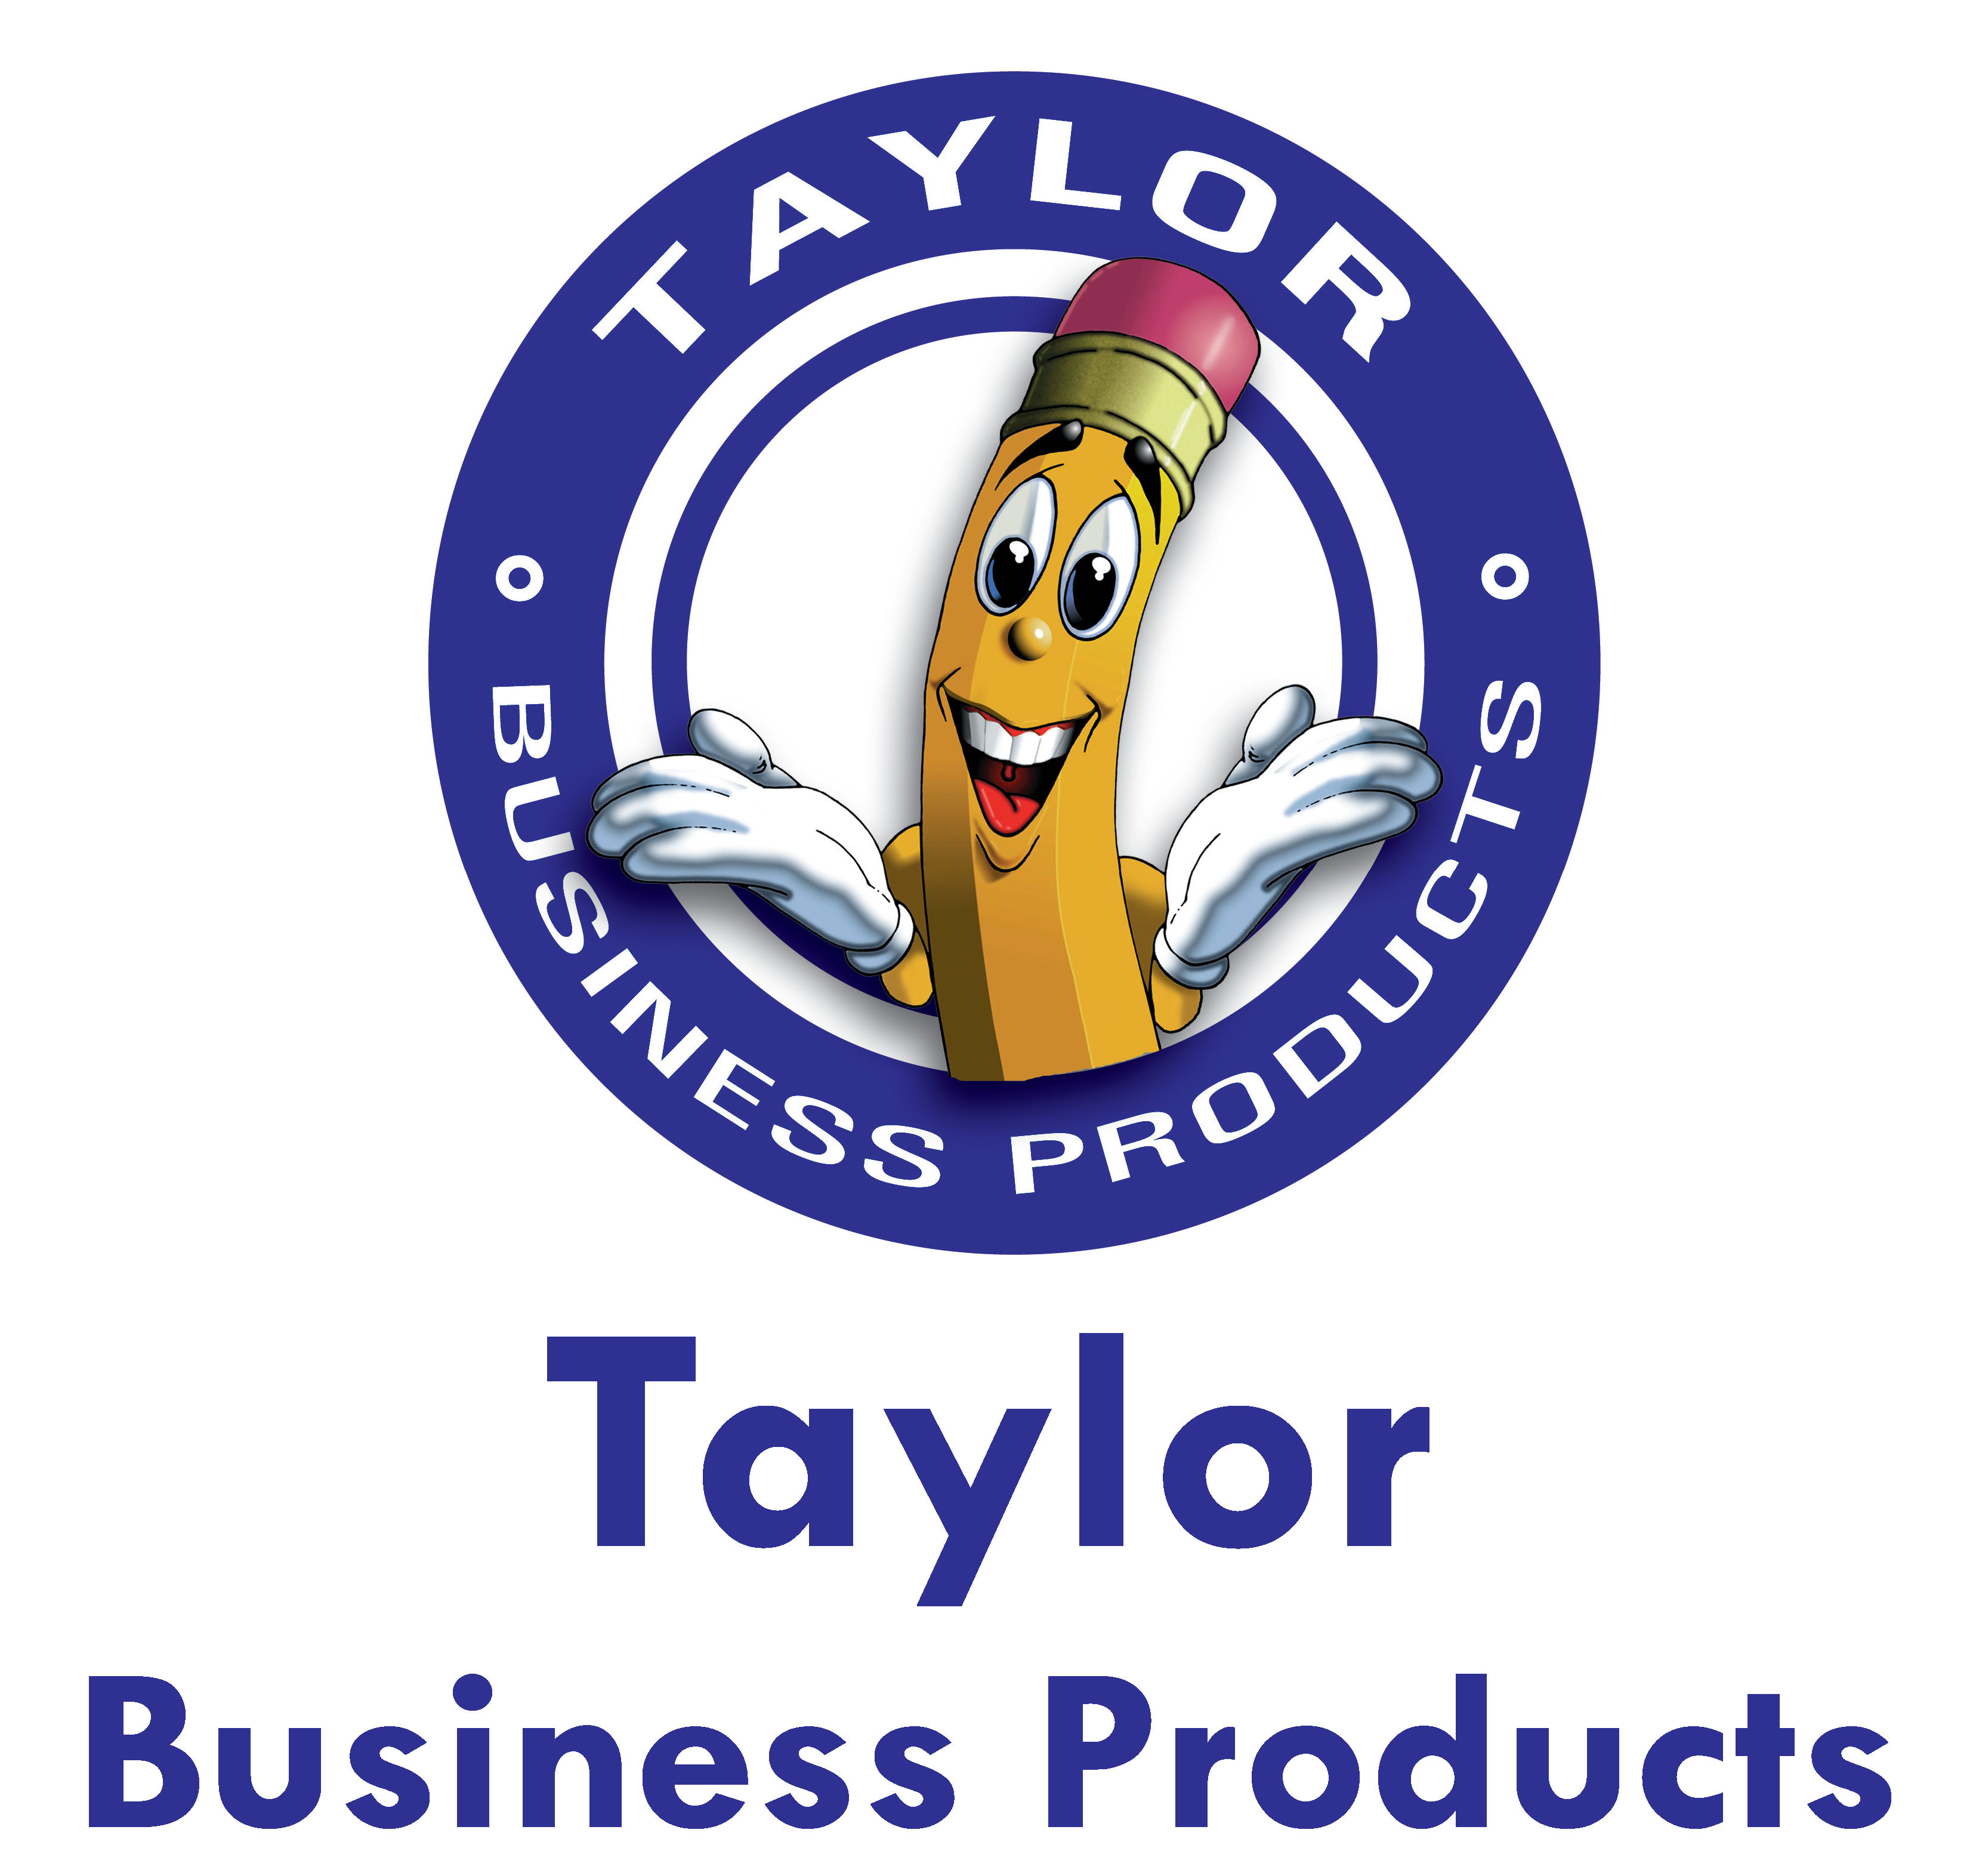 Taylors Business Products's Logo